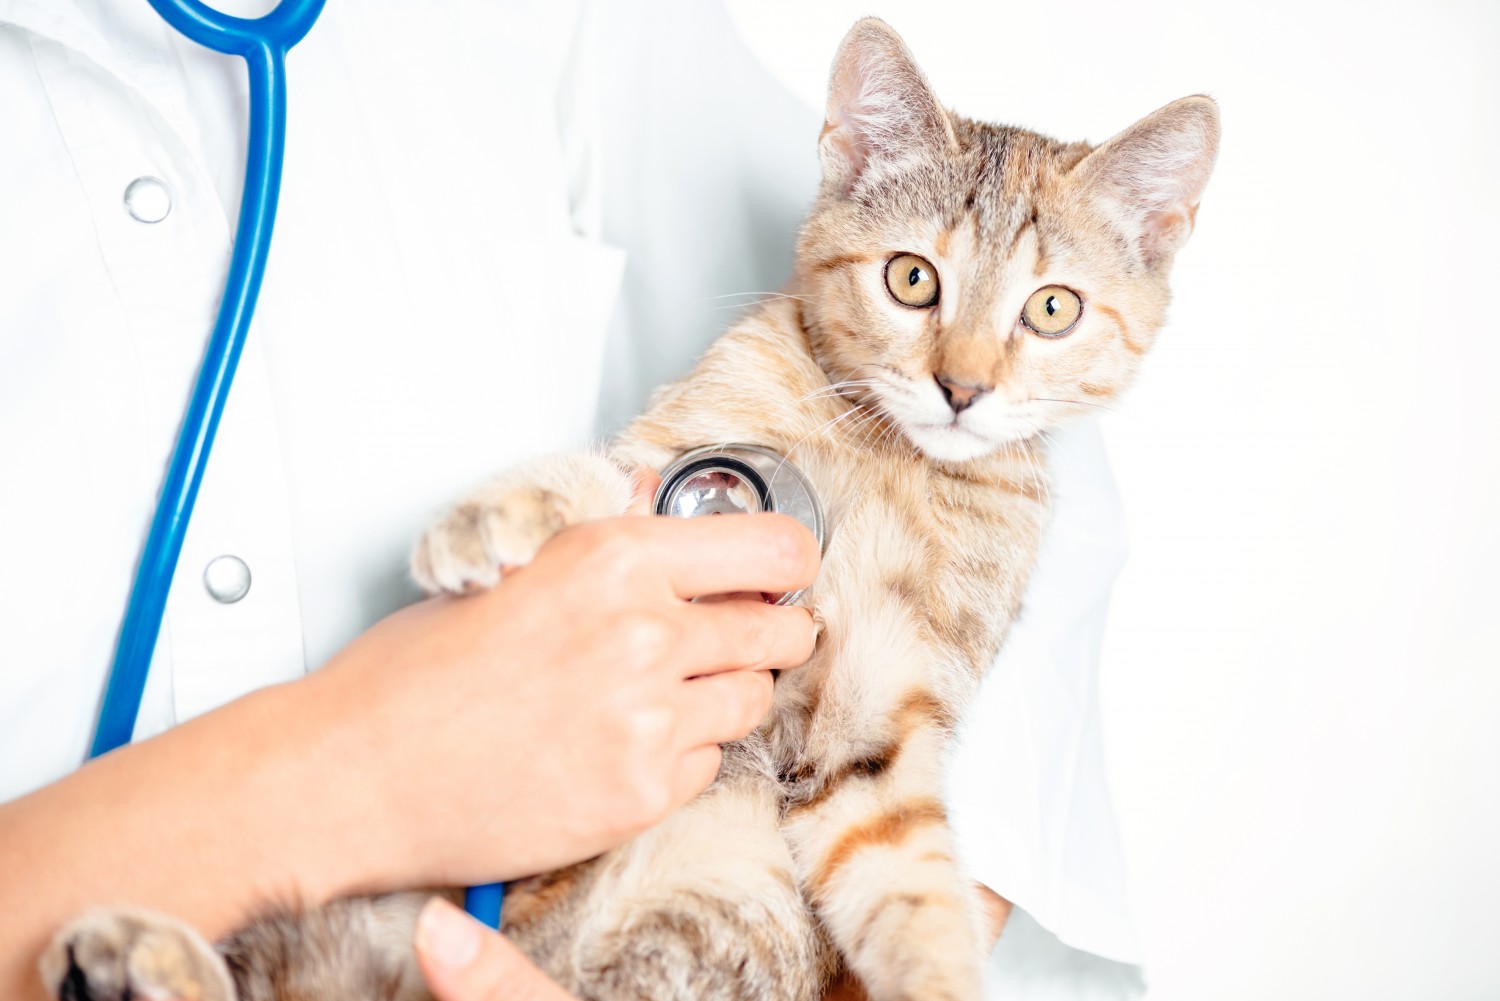 Cat Being Examined With a Stethoscope